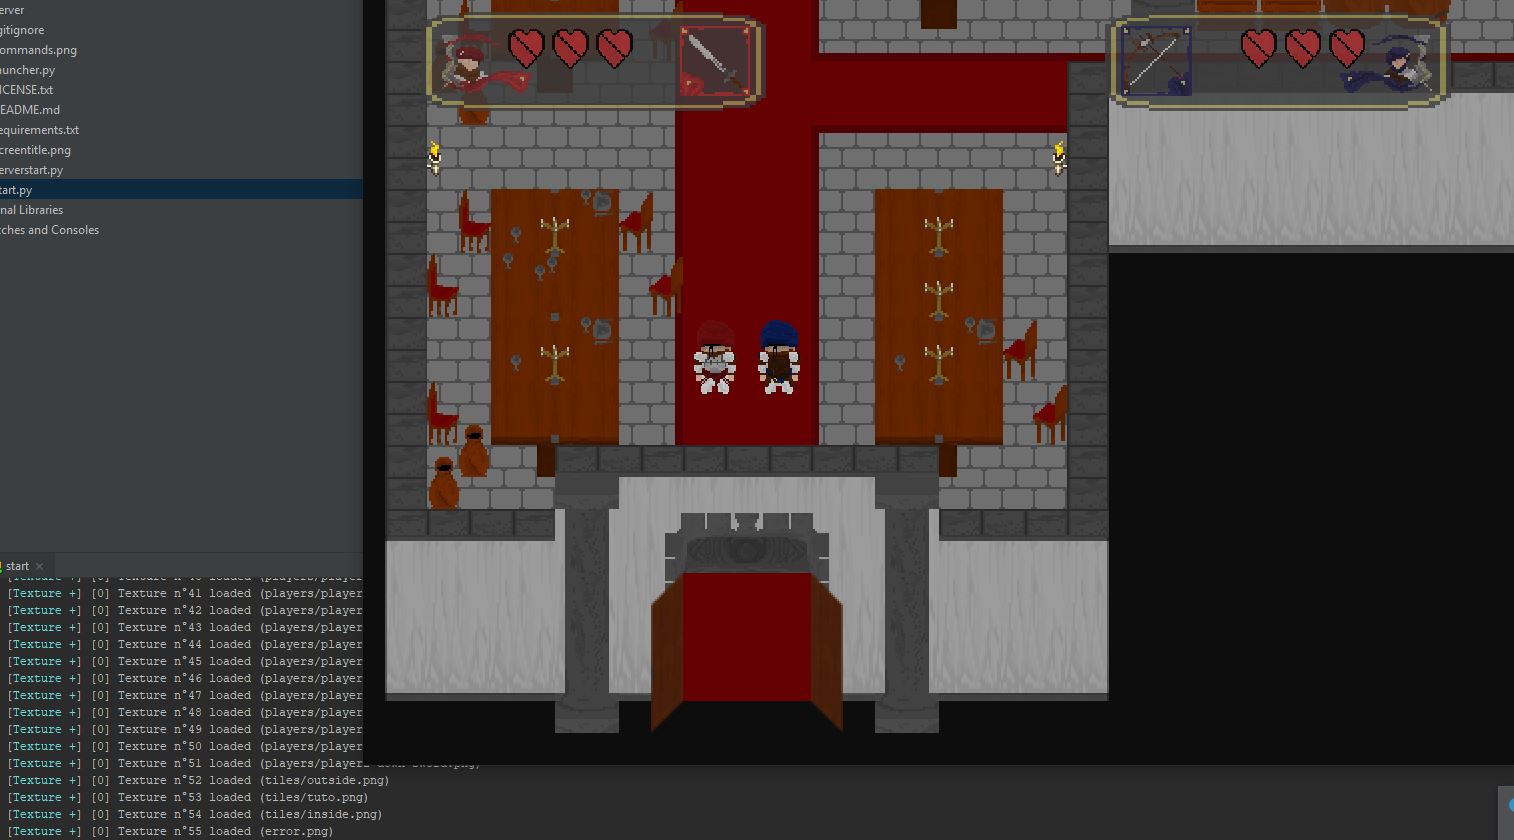 Player in the dungeon hall.